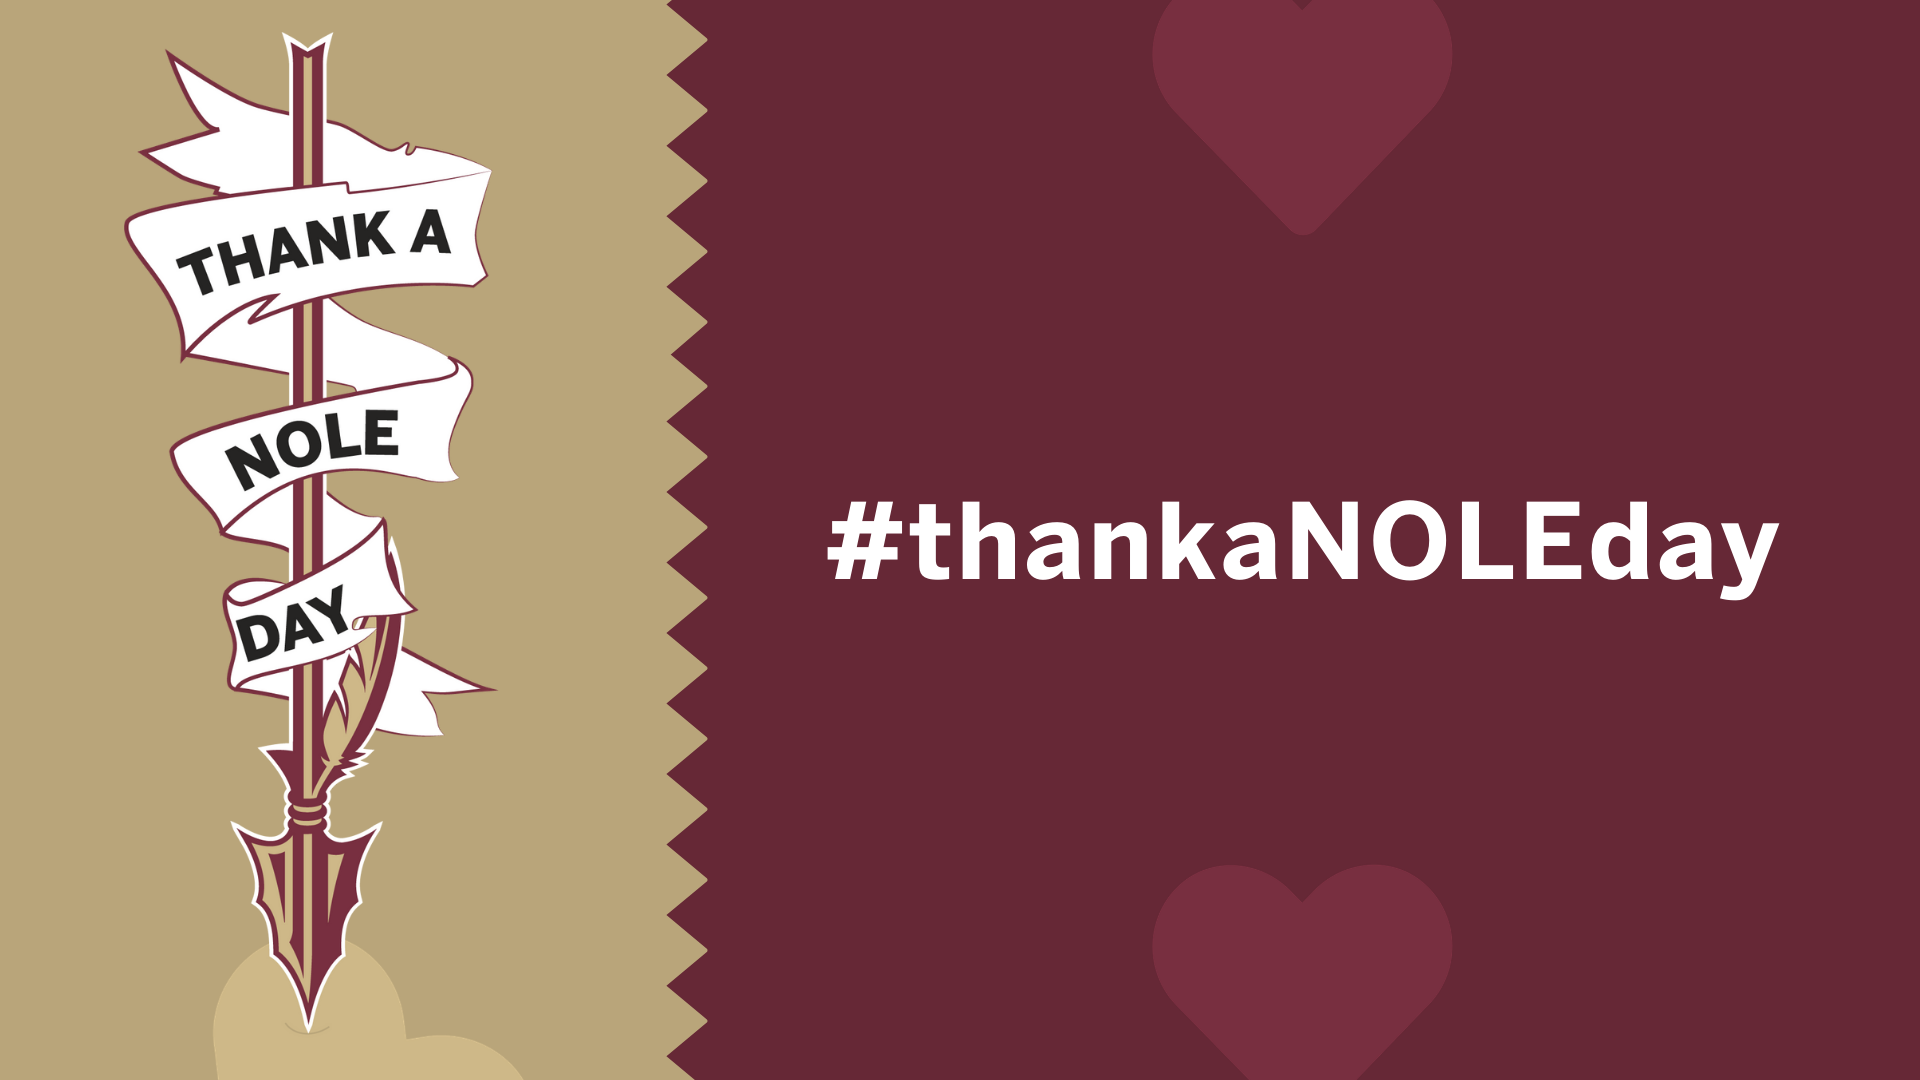 Image of Thank a Nole Day logo